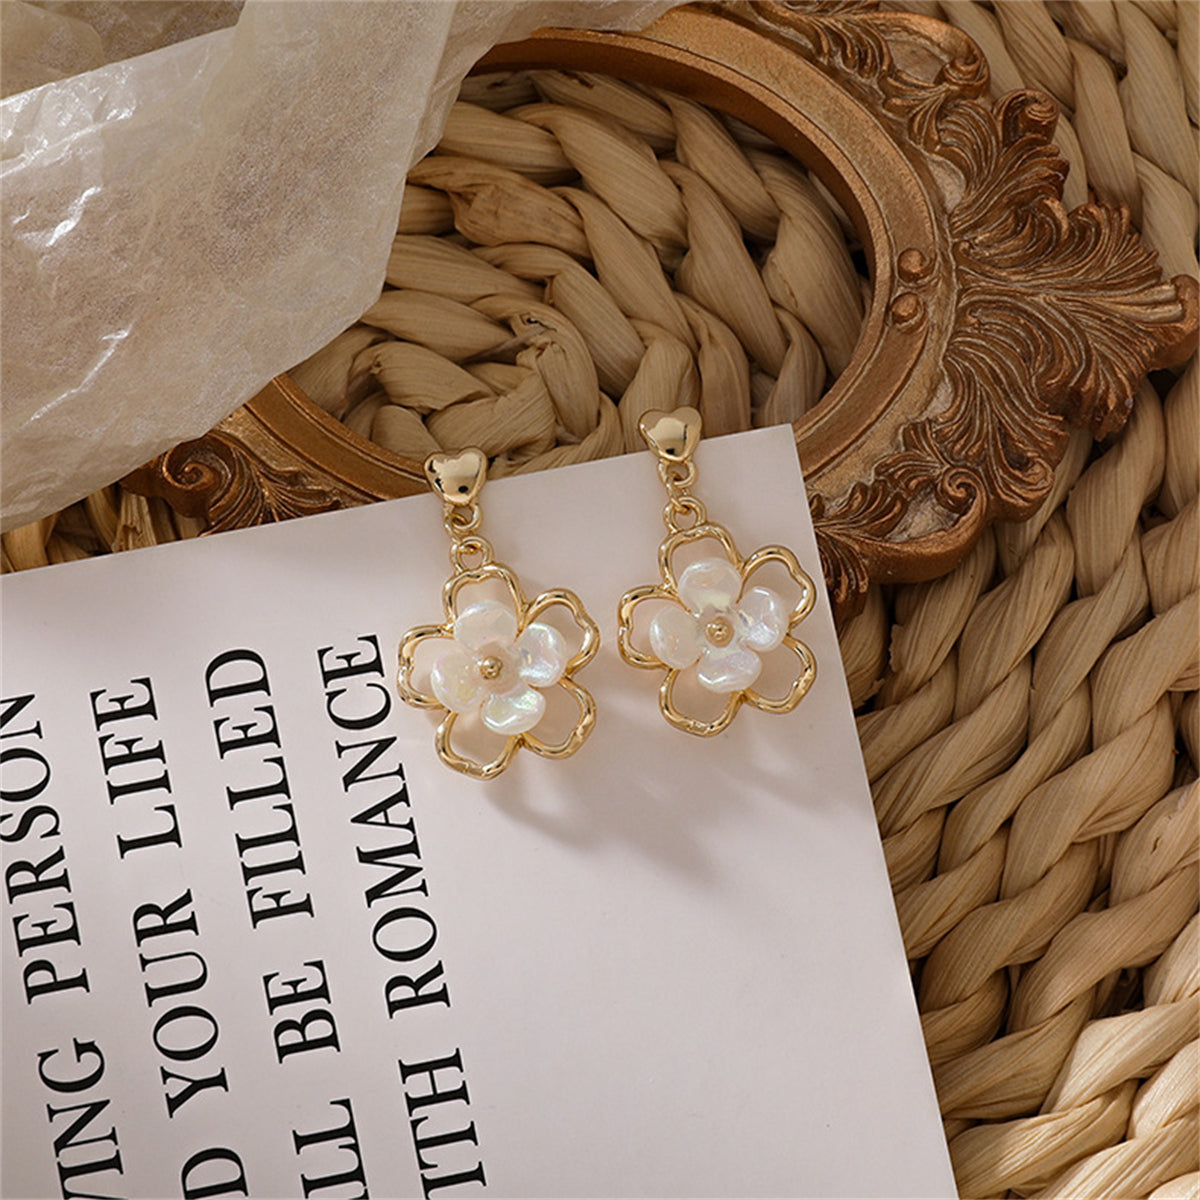 White Acrylic & 18K Gold-Plated Floral Heart Drop Earrings